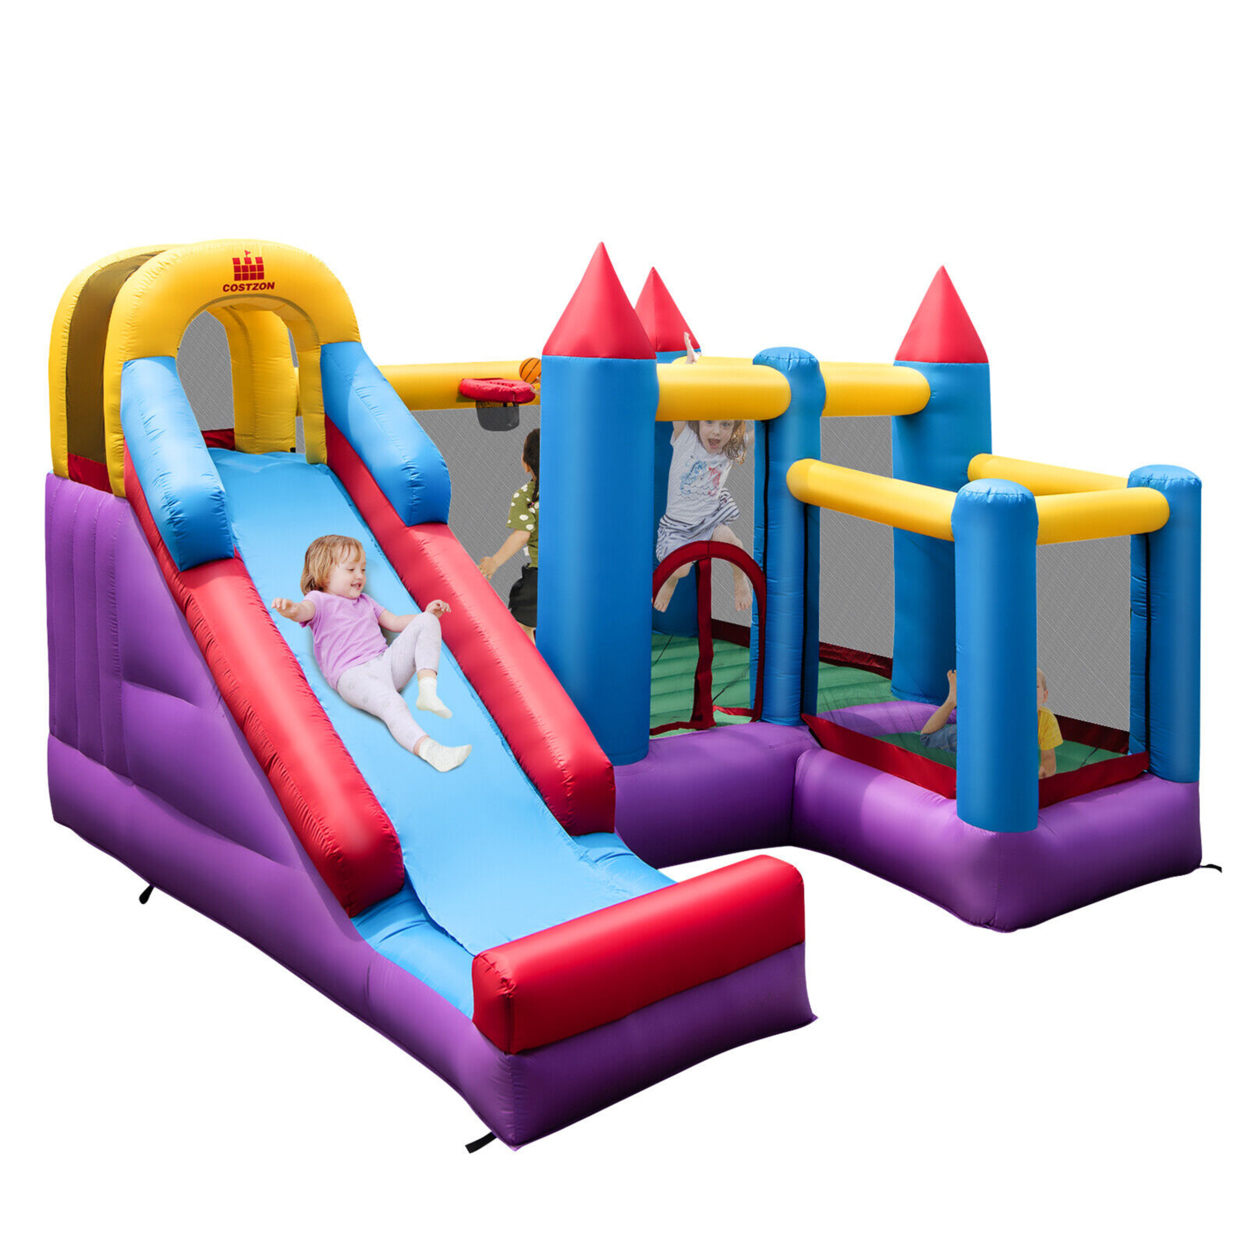 Inflatable Bounce House 5-in-1 Inflatable Bouncer Indoor & Outdoor Blower Excluded